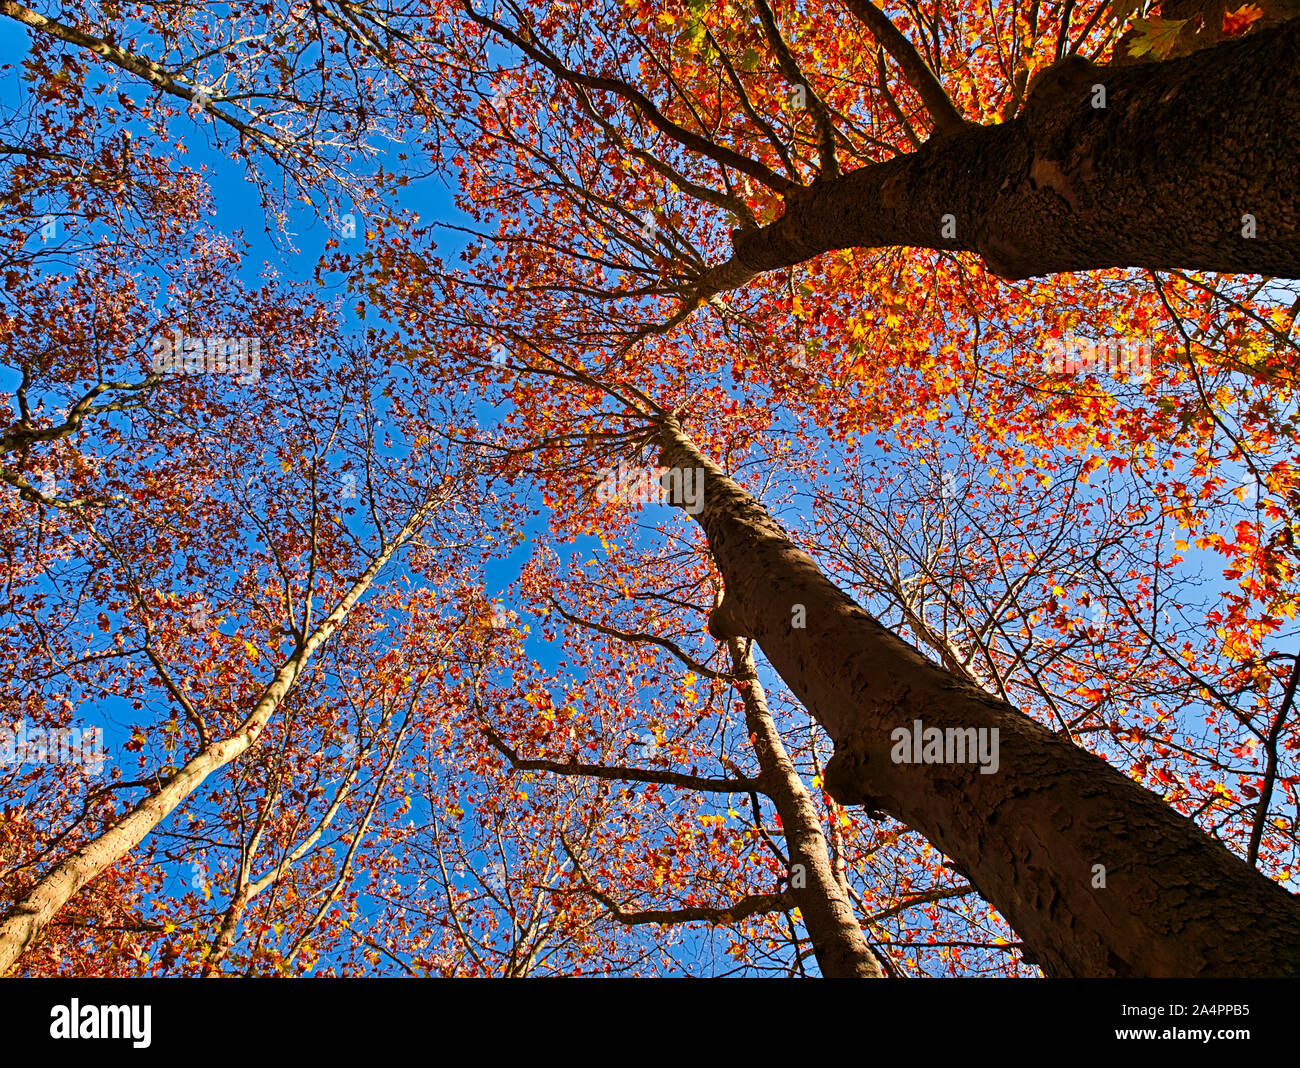 Looking up at vibrant autumn sycamore trees with colorful foliage against blue sky. Stock Photo